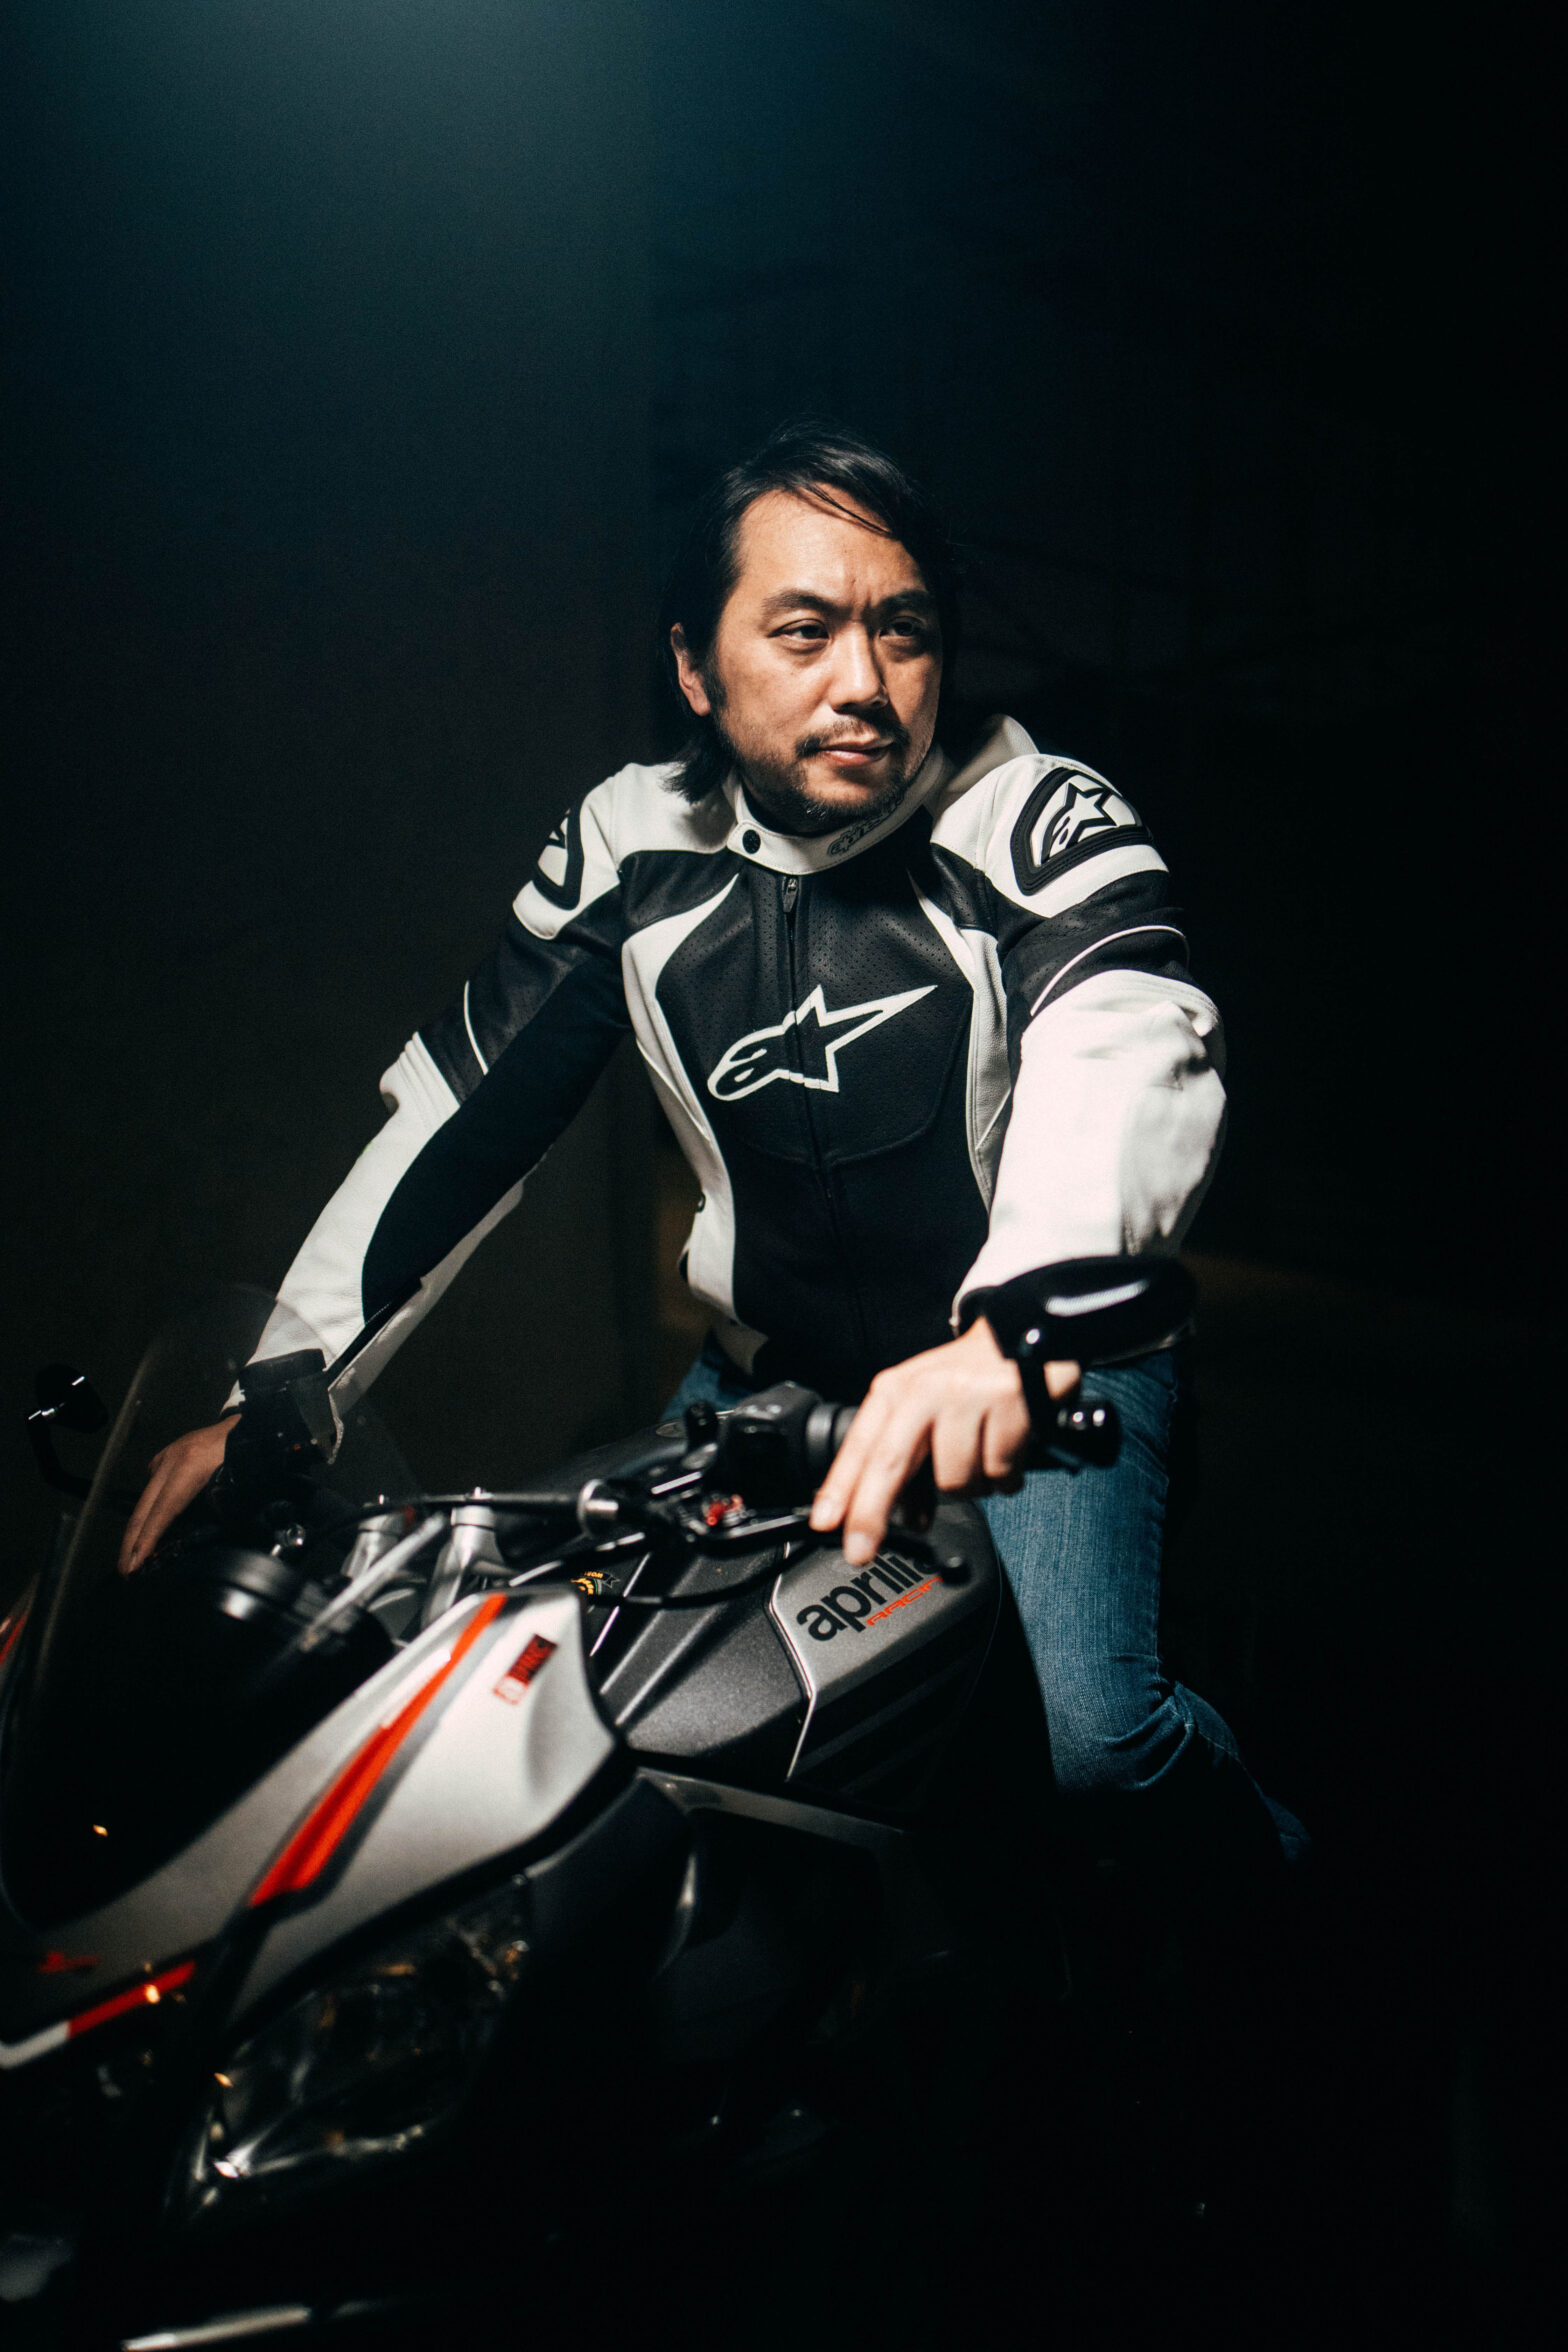 INTERVIEW with Greg Tada, Motorcycle Designer